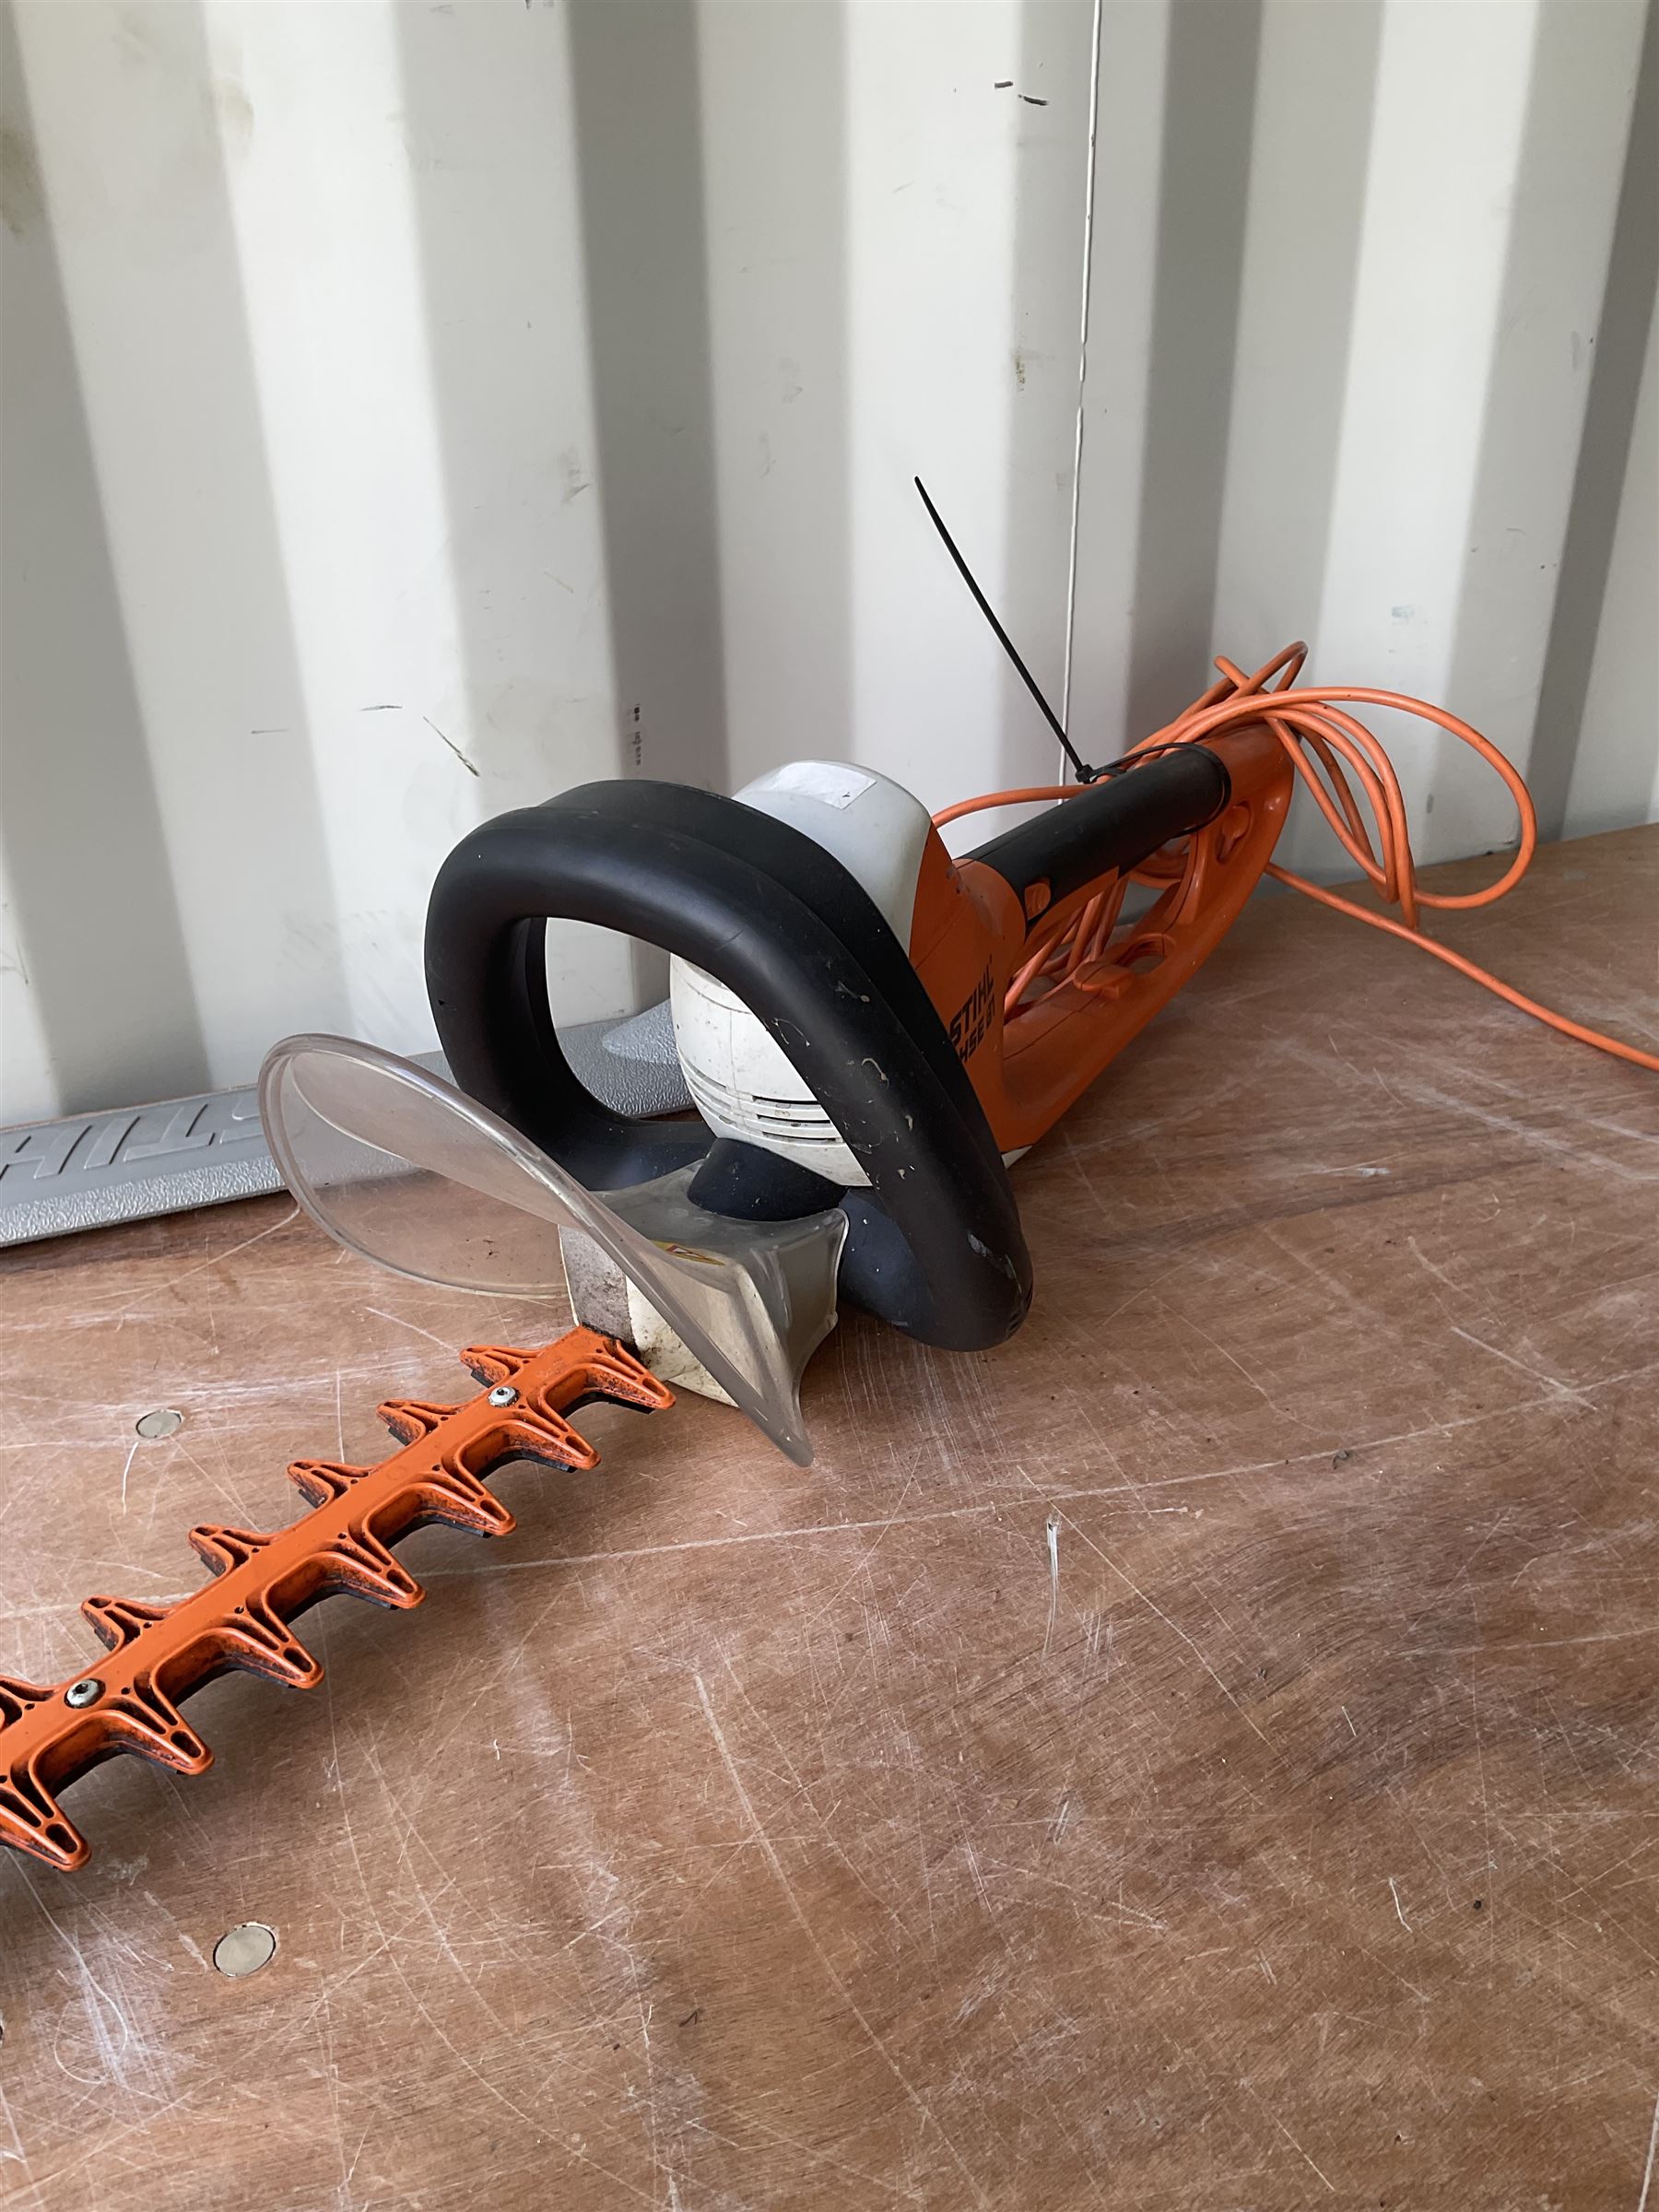 Stihl HSE 81 electric hedge trimmer 28 inch blade - THIS LOT IS TO BE COLLECTED BY APPOINTMENT FROM - Image 3 of 4